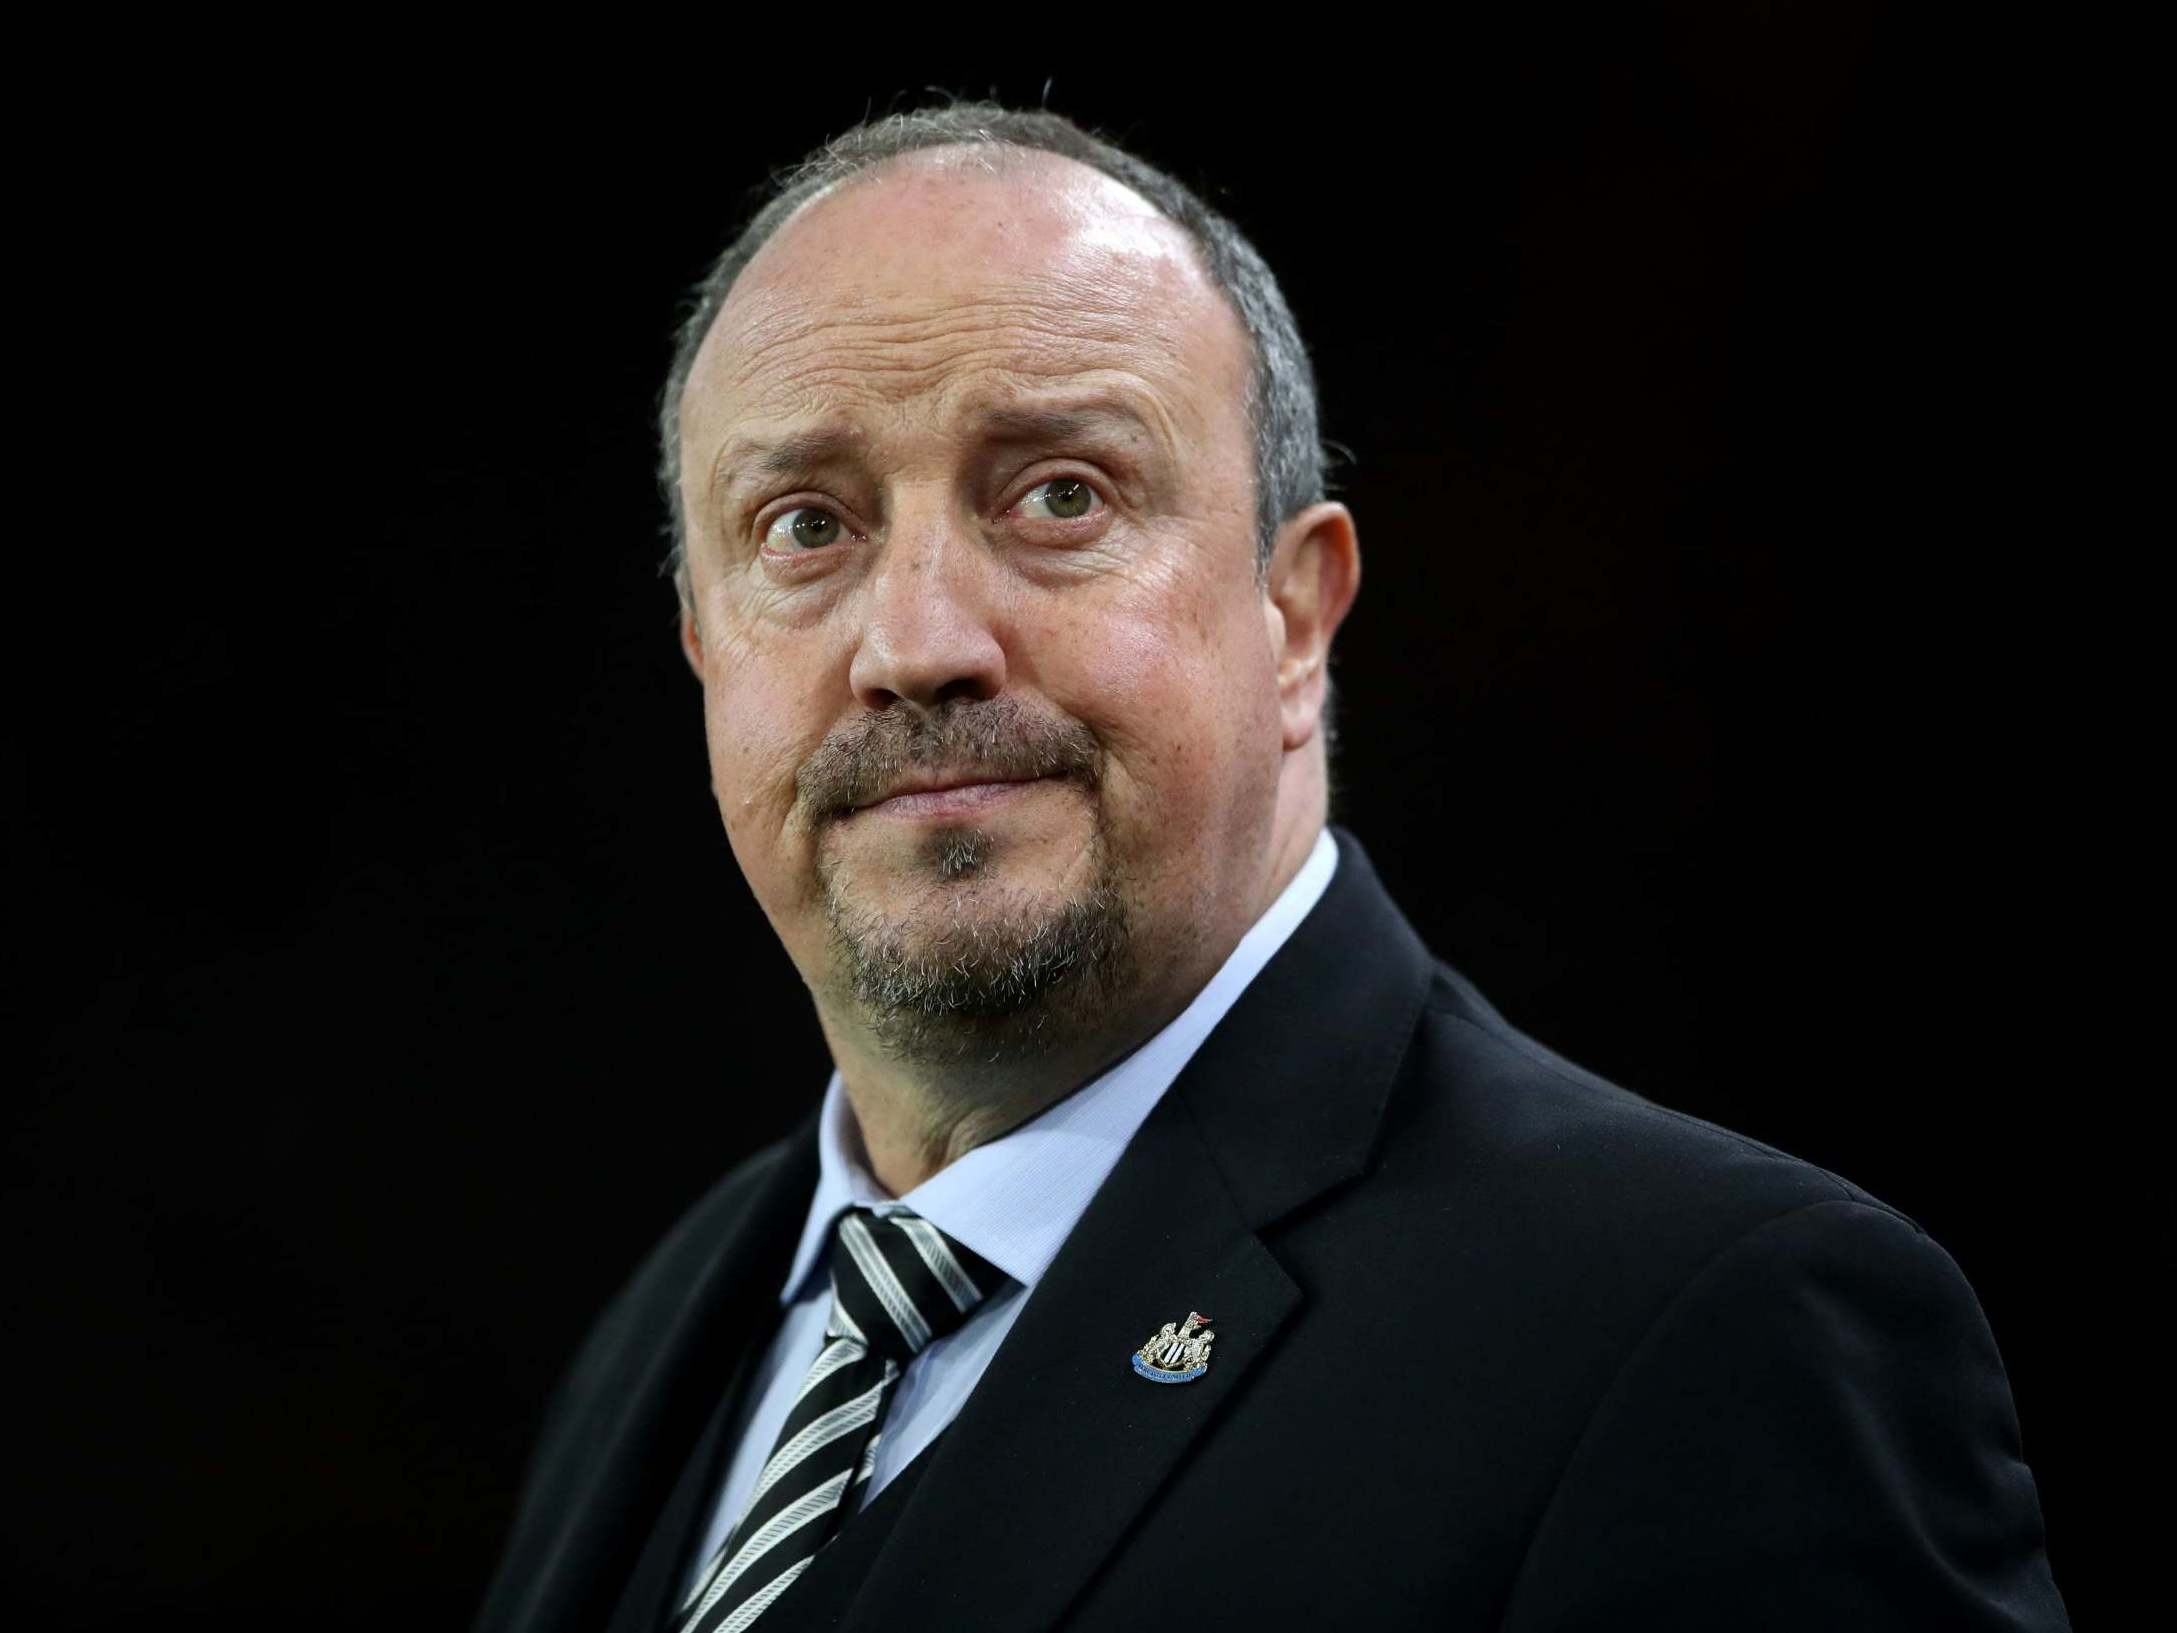 Benitez failed to agree a new contract with Newcastle